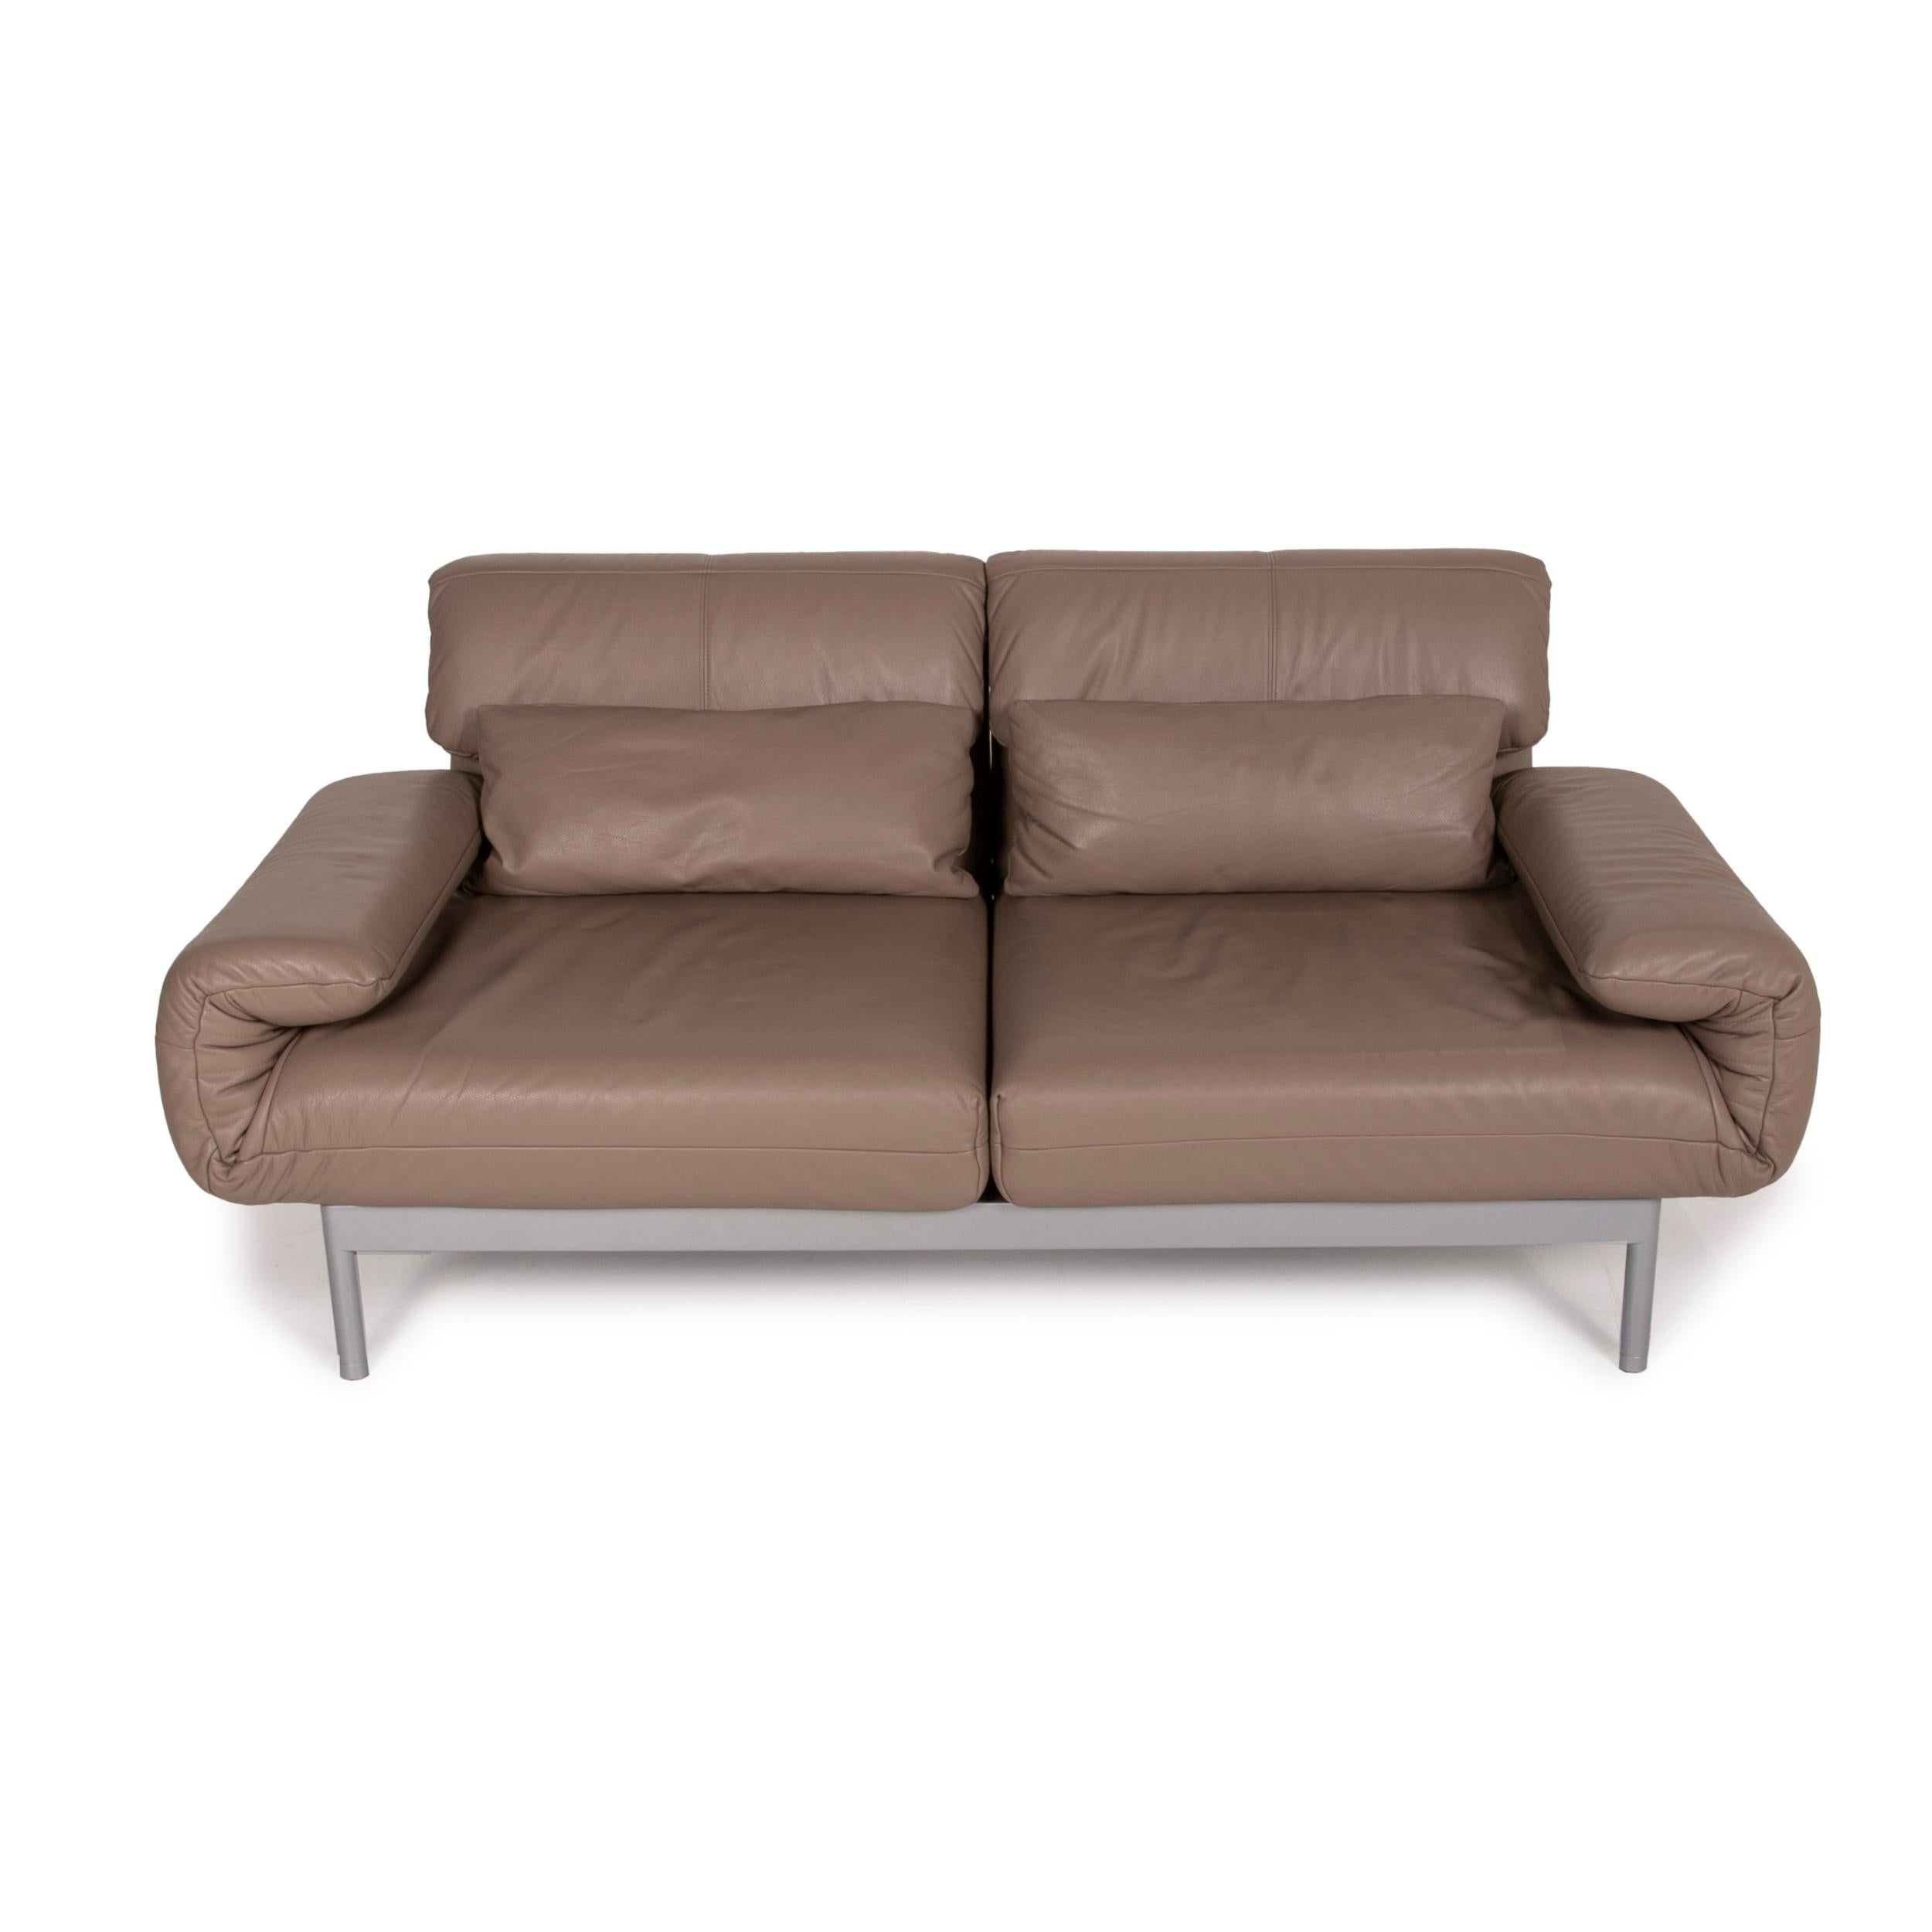 Rolf Benz Plura Leather Sofa Brown Two-Seater Function Reclining Function 3